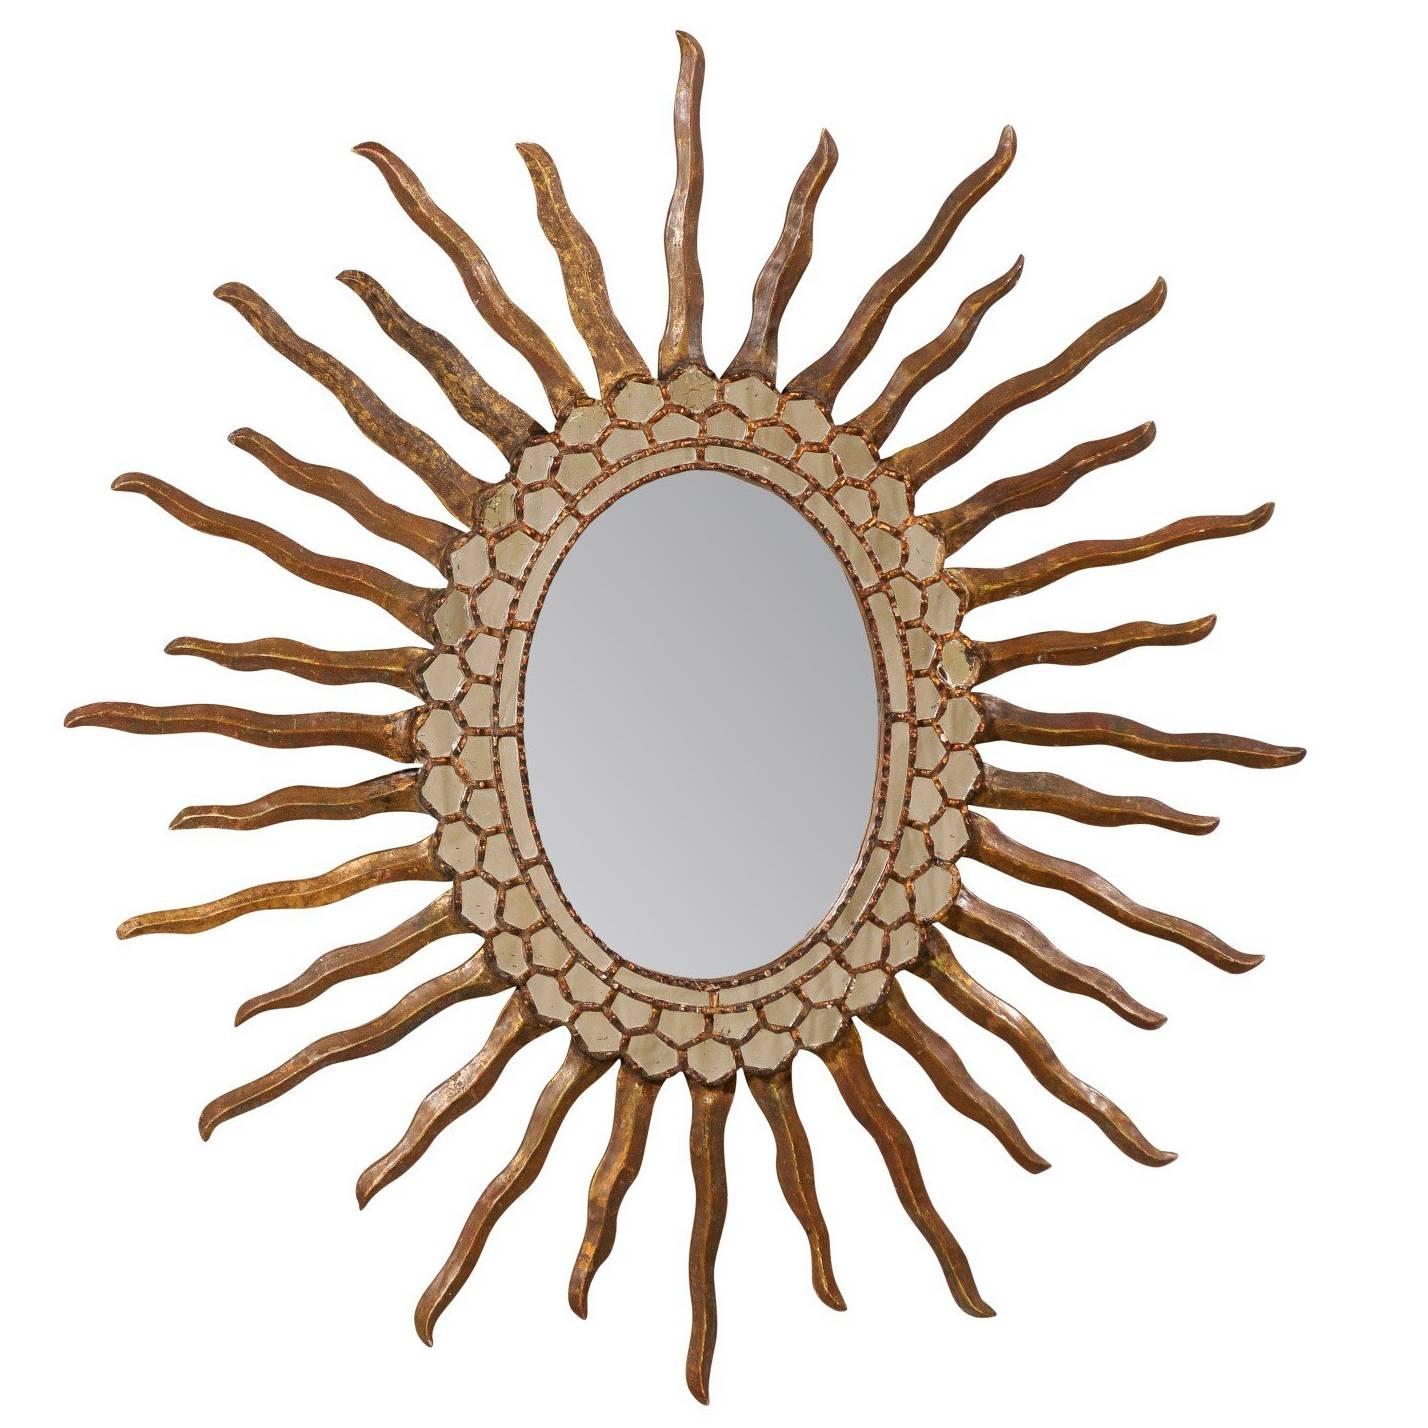 Spanish Oval Shaped Bronze and Gold Antiqued Sunburst Mirror, Intricate Surround